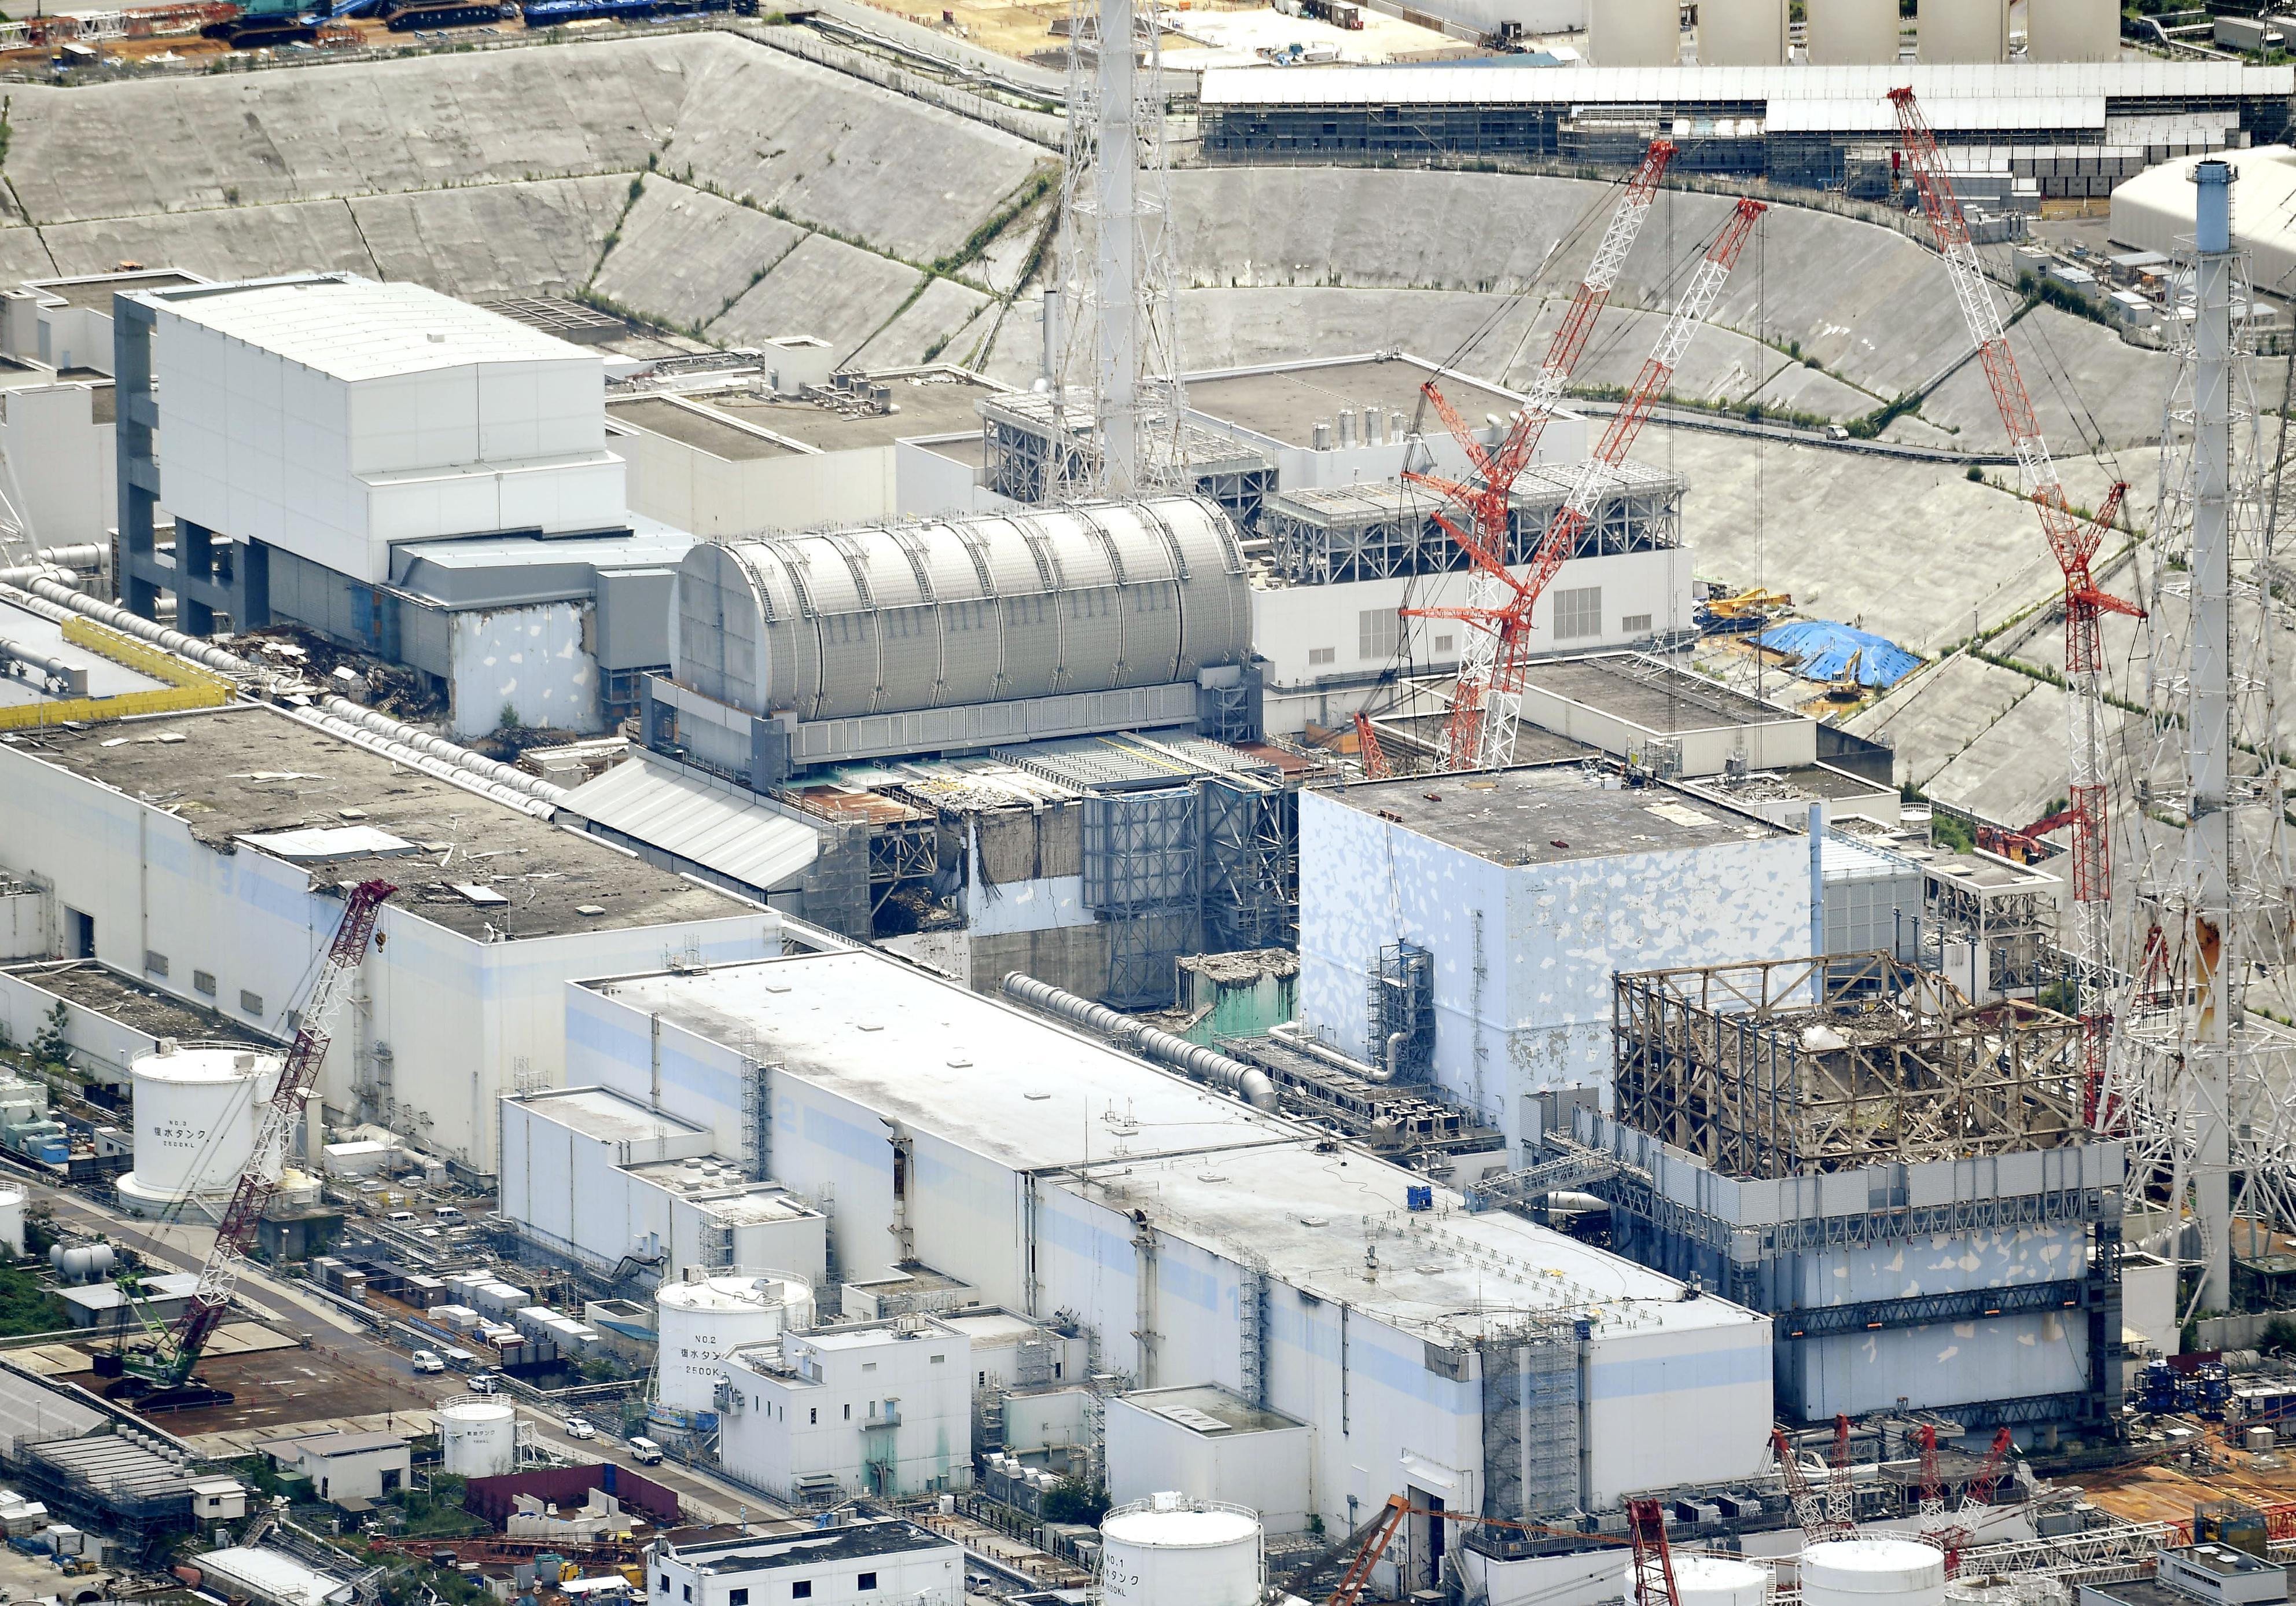 The Fukushima No. 1 nuclear power plant, which was crippled in the aftermath of the massive 2011 earthquake and tsunami, seen in 2018.  | KYODO